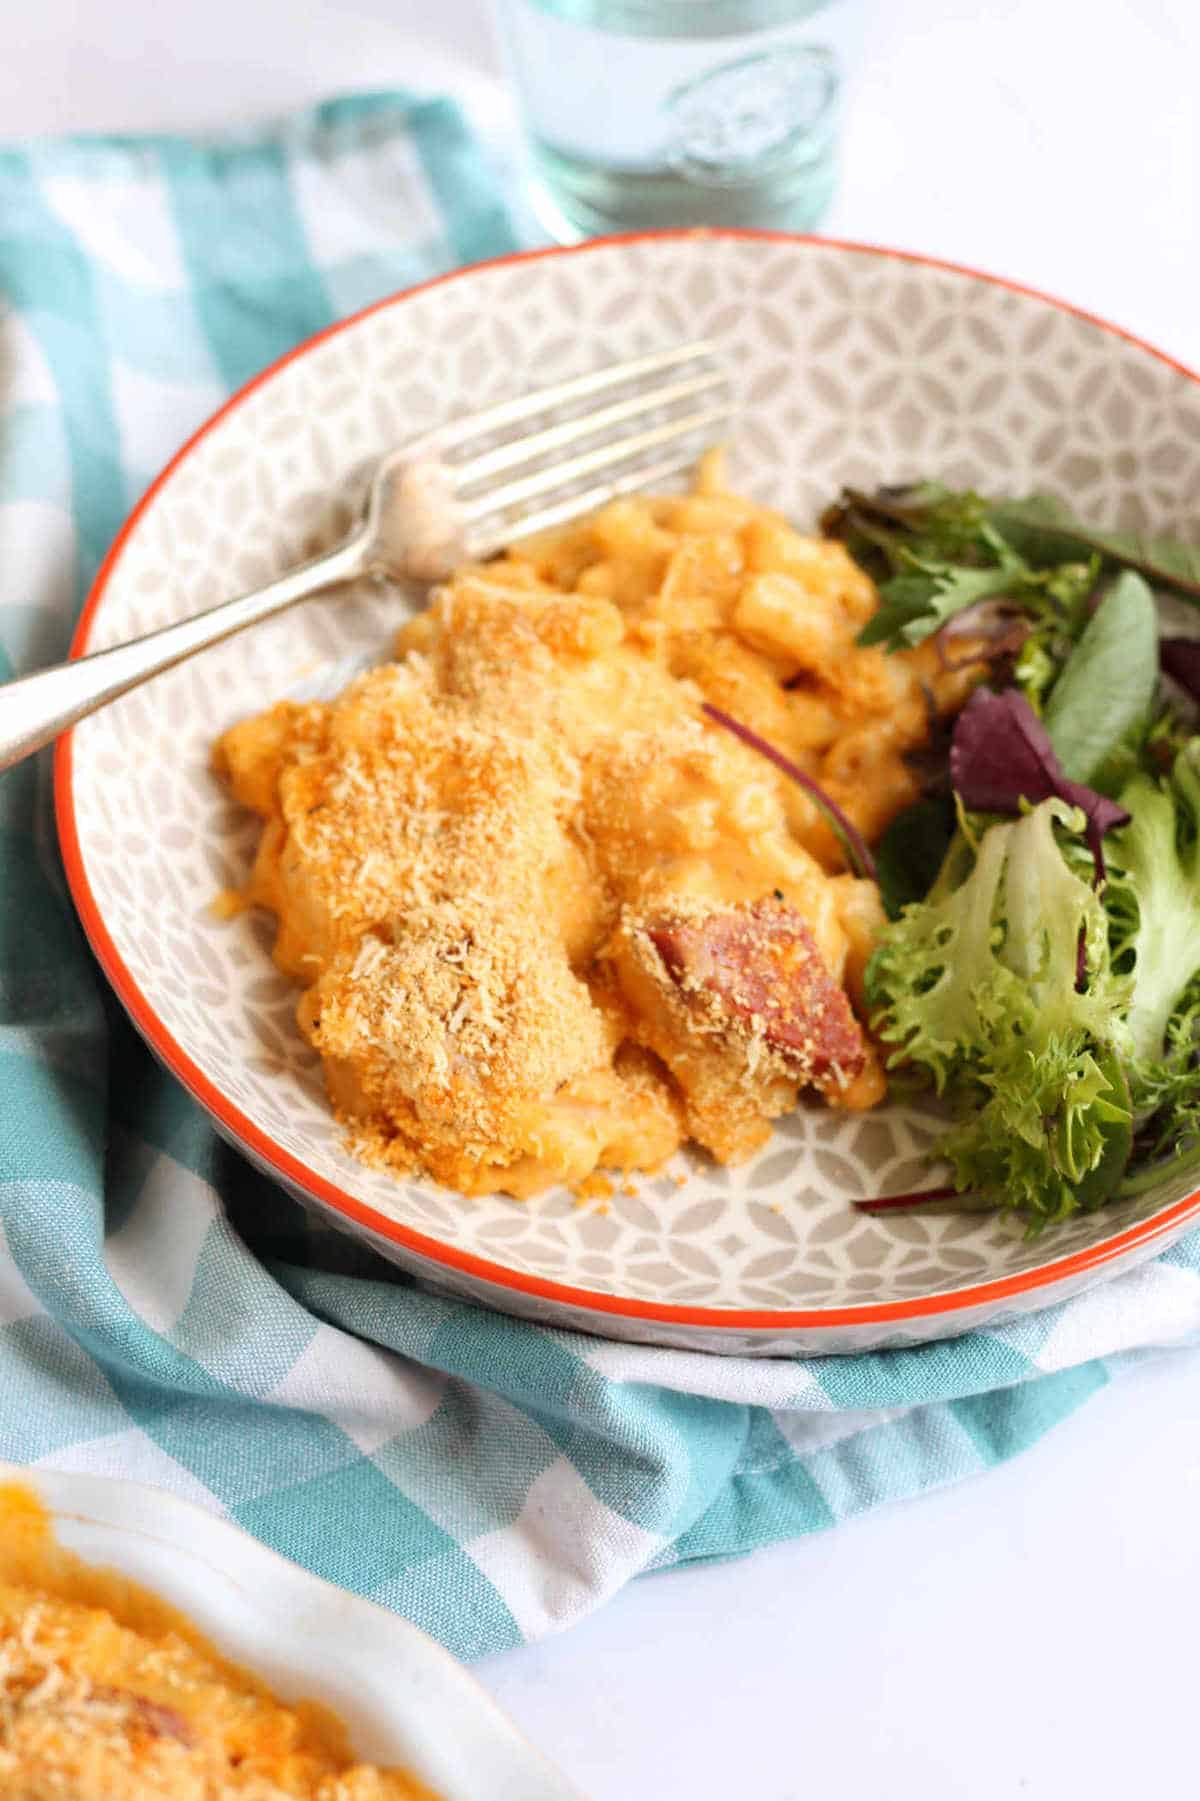 A bowl of macaroni cheese with side salad.